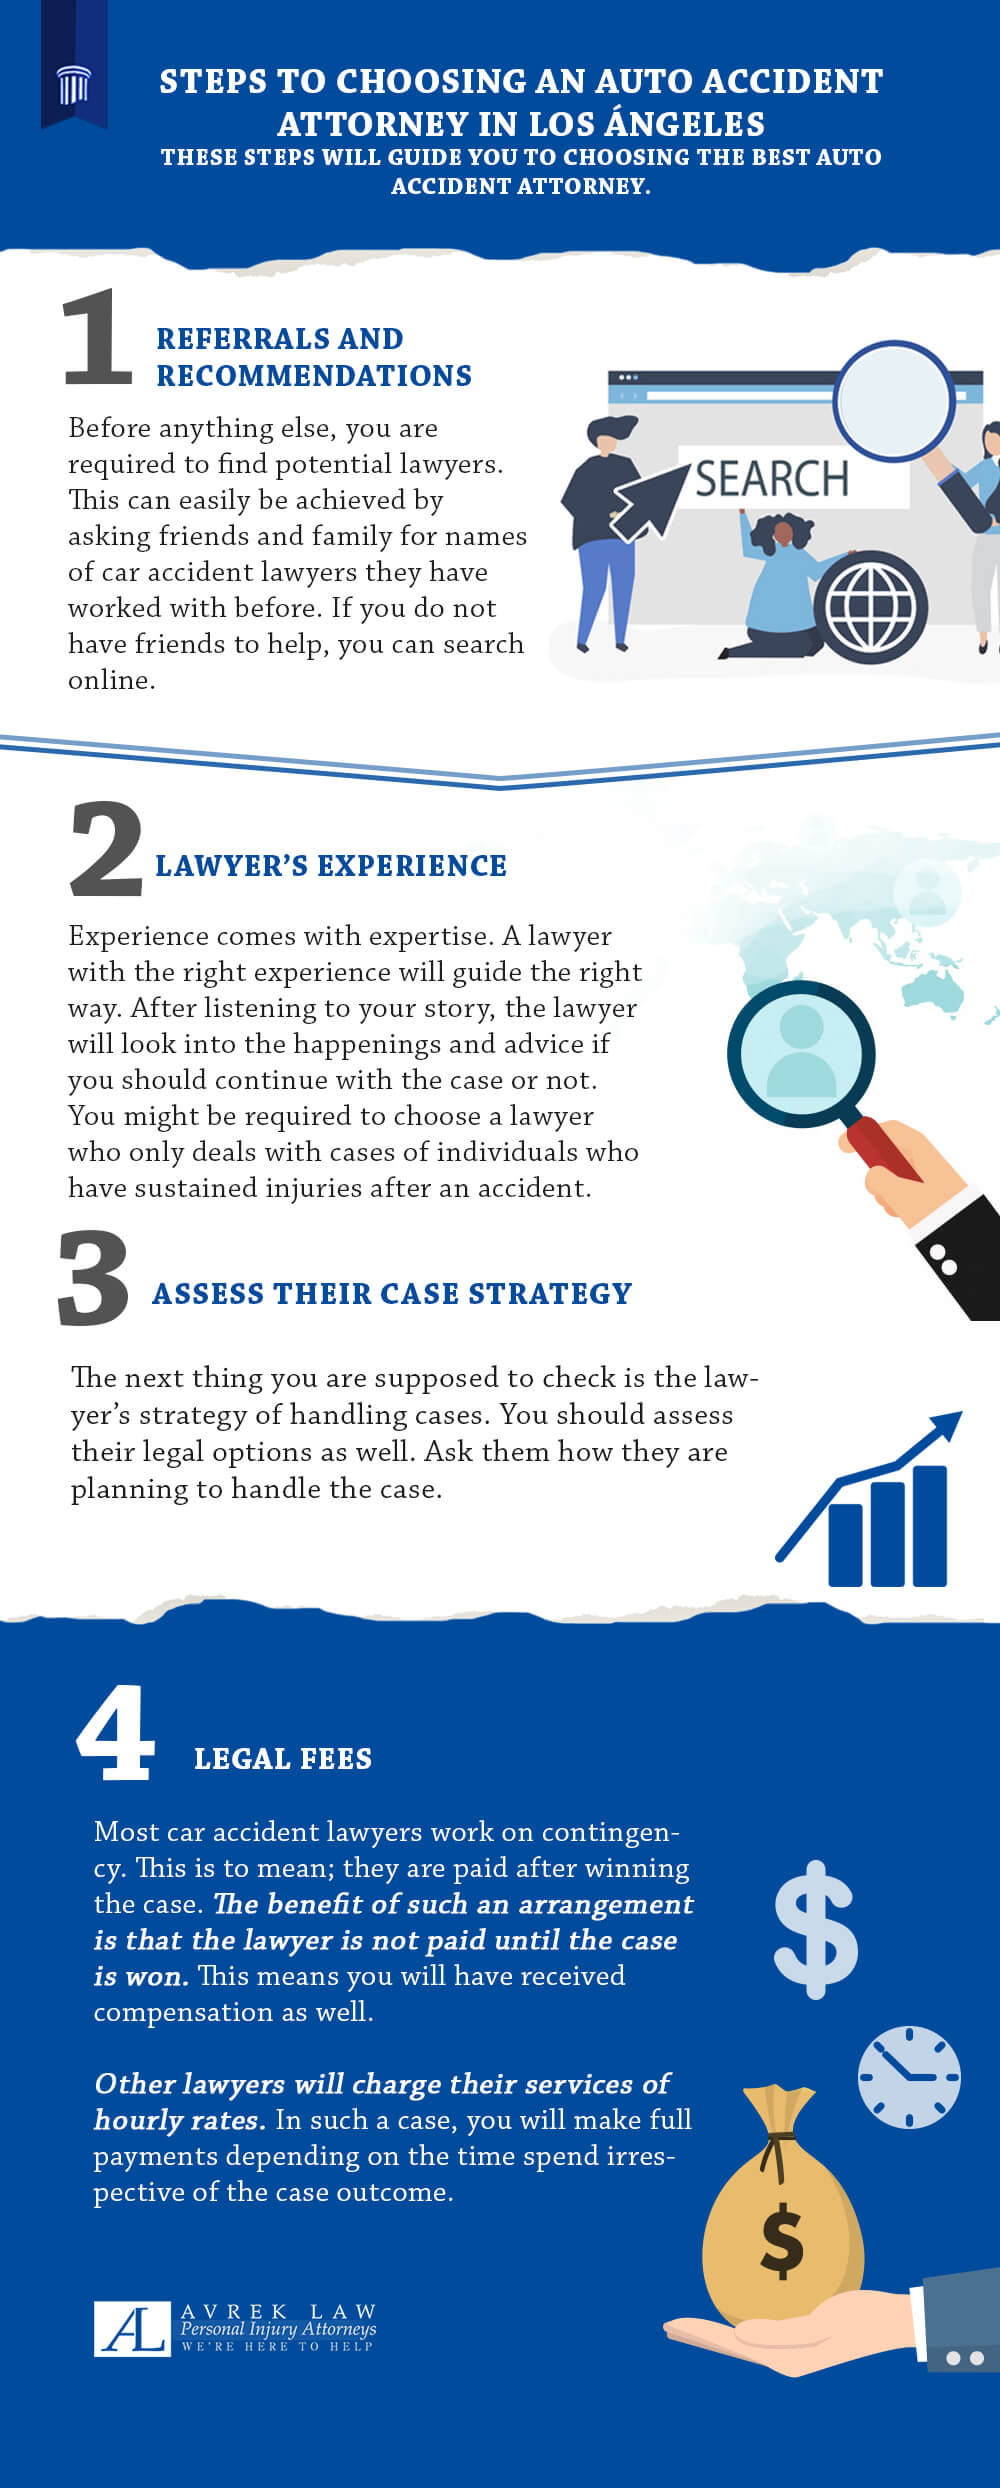 Automobile Accidents: How to Find the Right Attorney